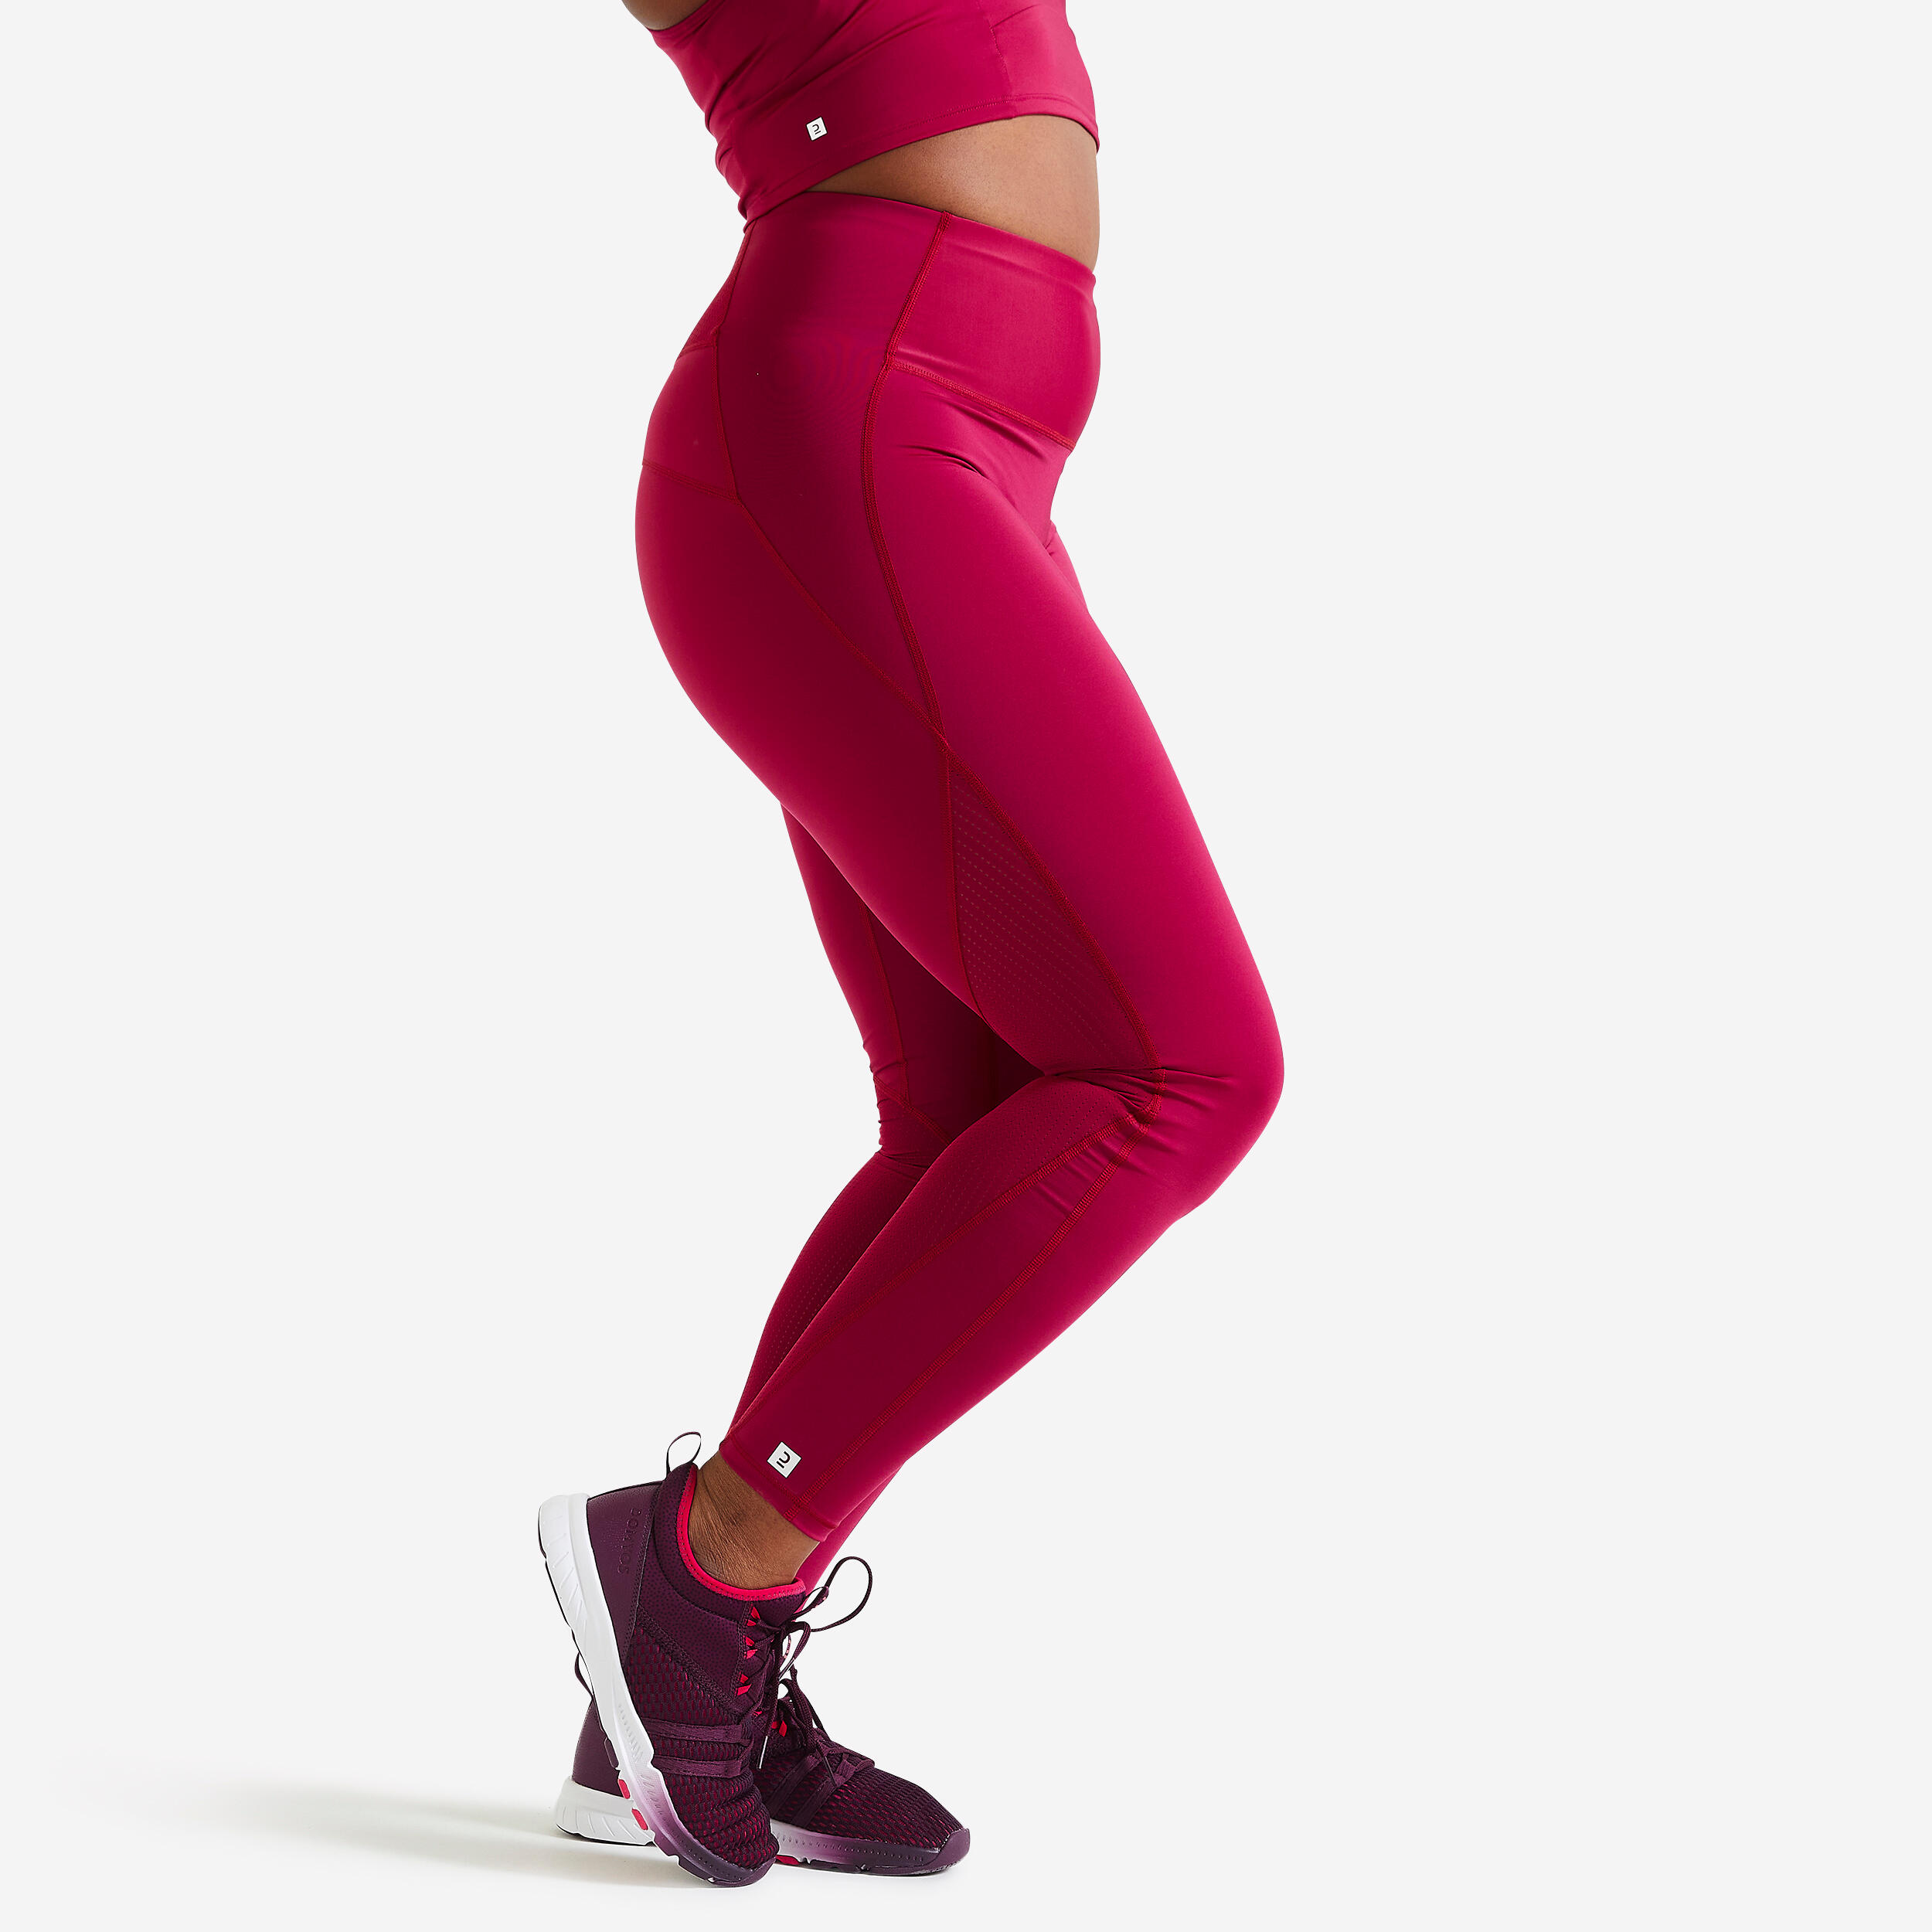 DOMYOS Women's shaping fitness cardio high-waisted leggings, beetroot